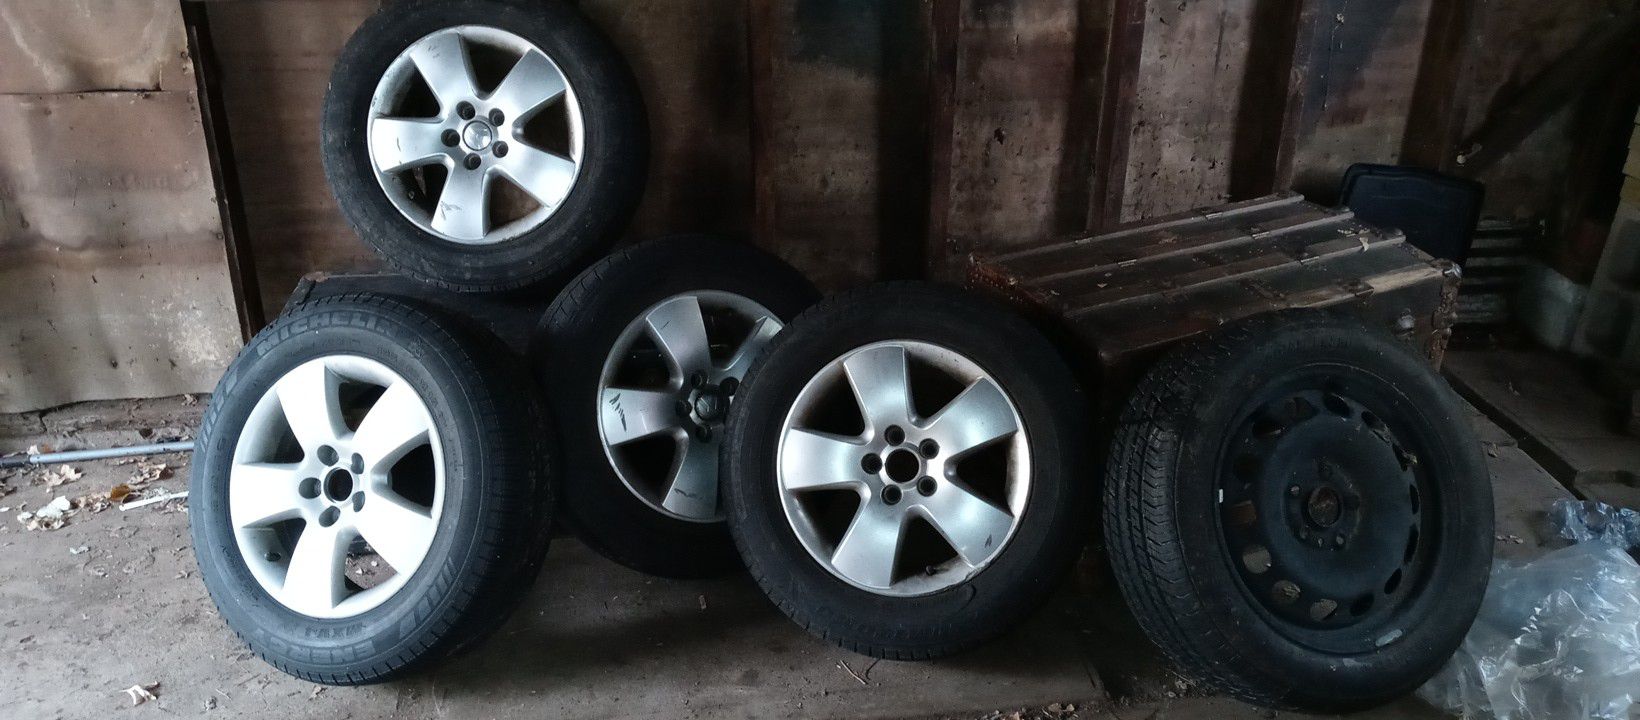 Volkswagen rims for sale with spare$ 150 or B.O